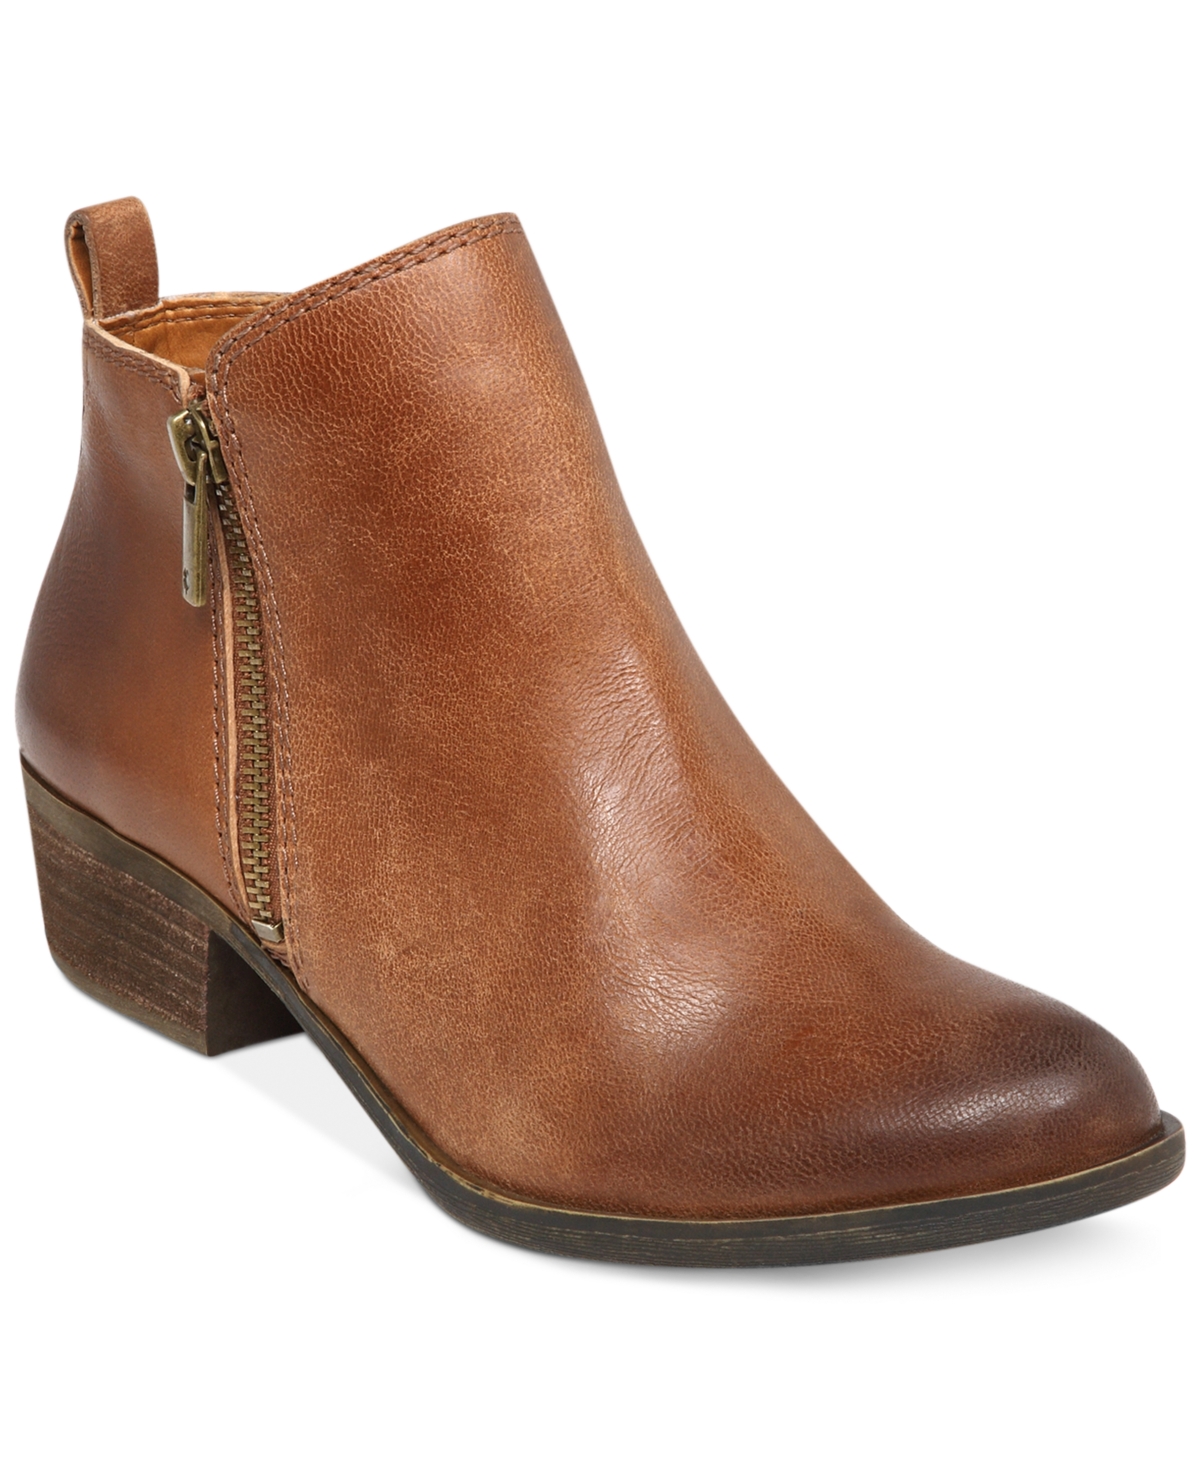 LUCKY BRAND WOMEN'S BASEL LEATHER BOOTIES WOMEN'S SHOES